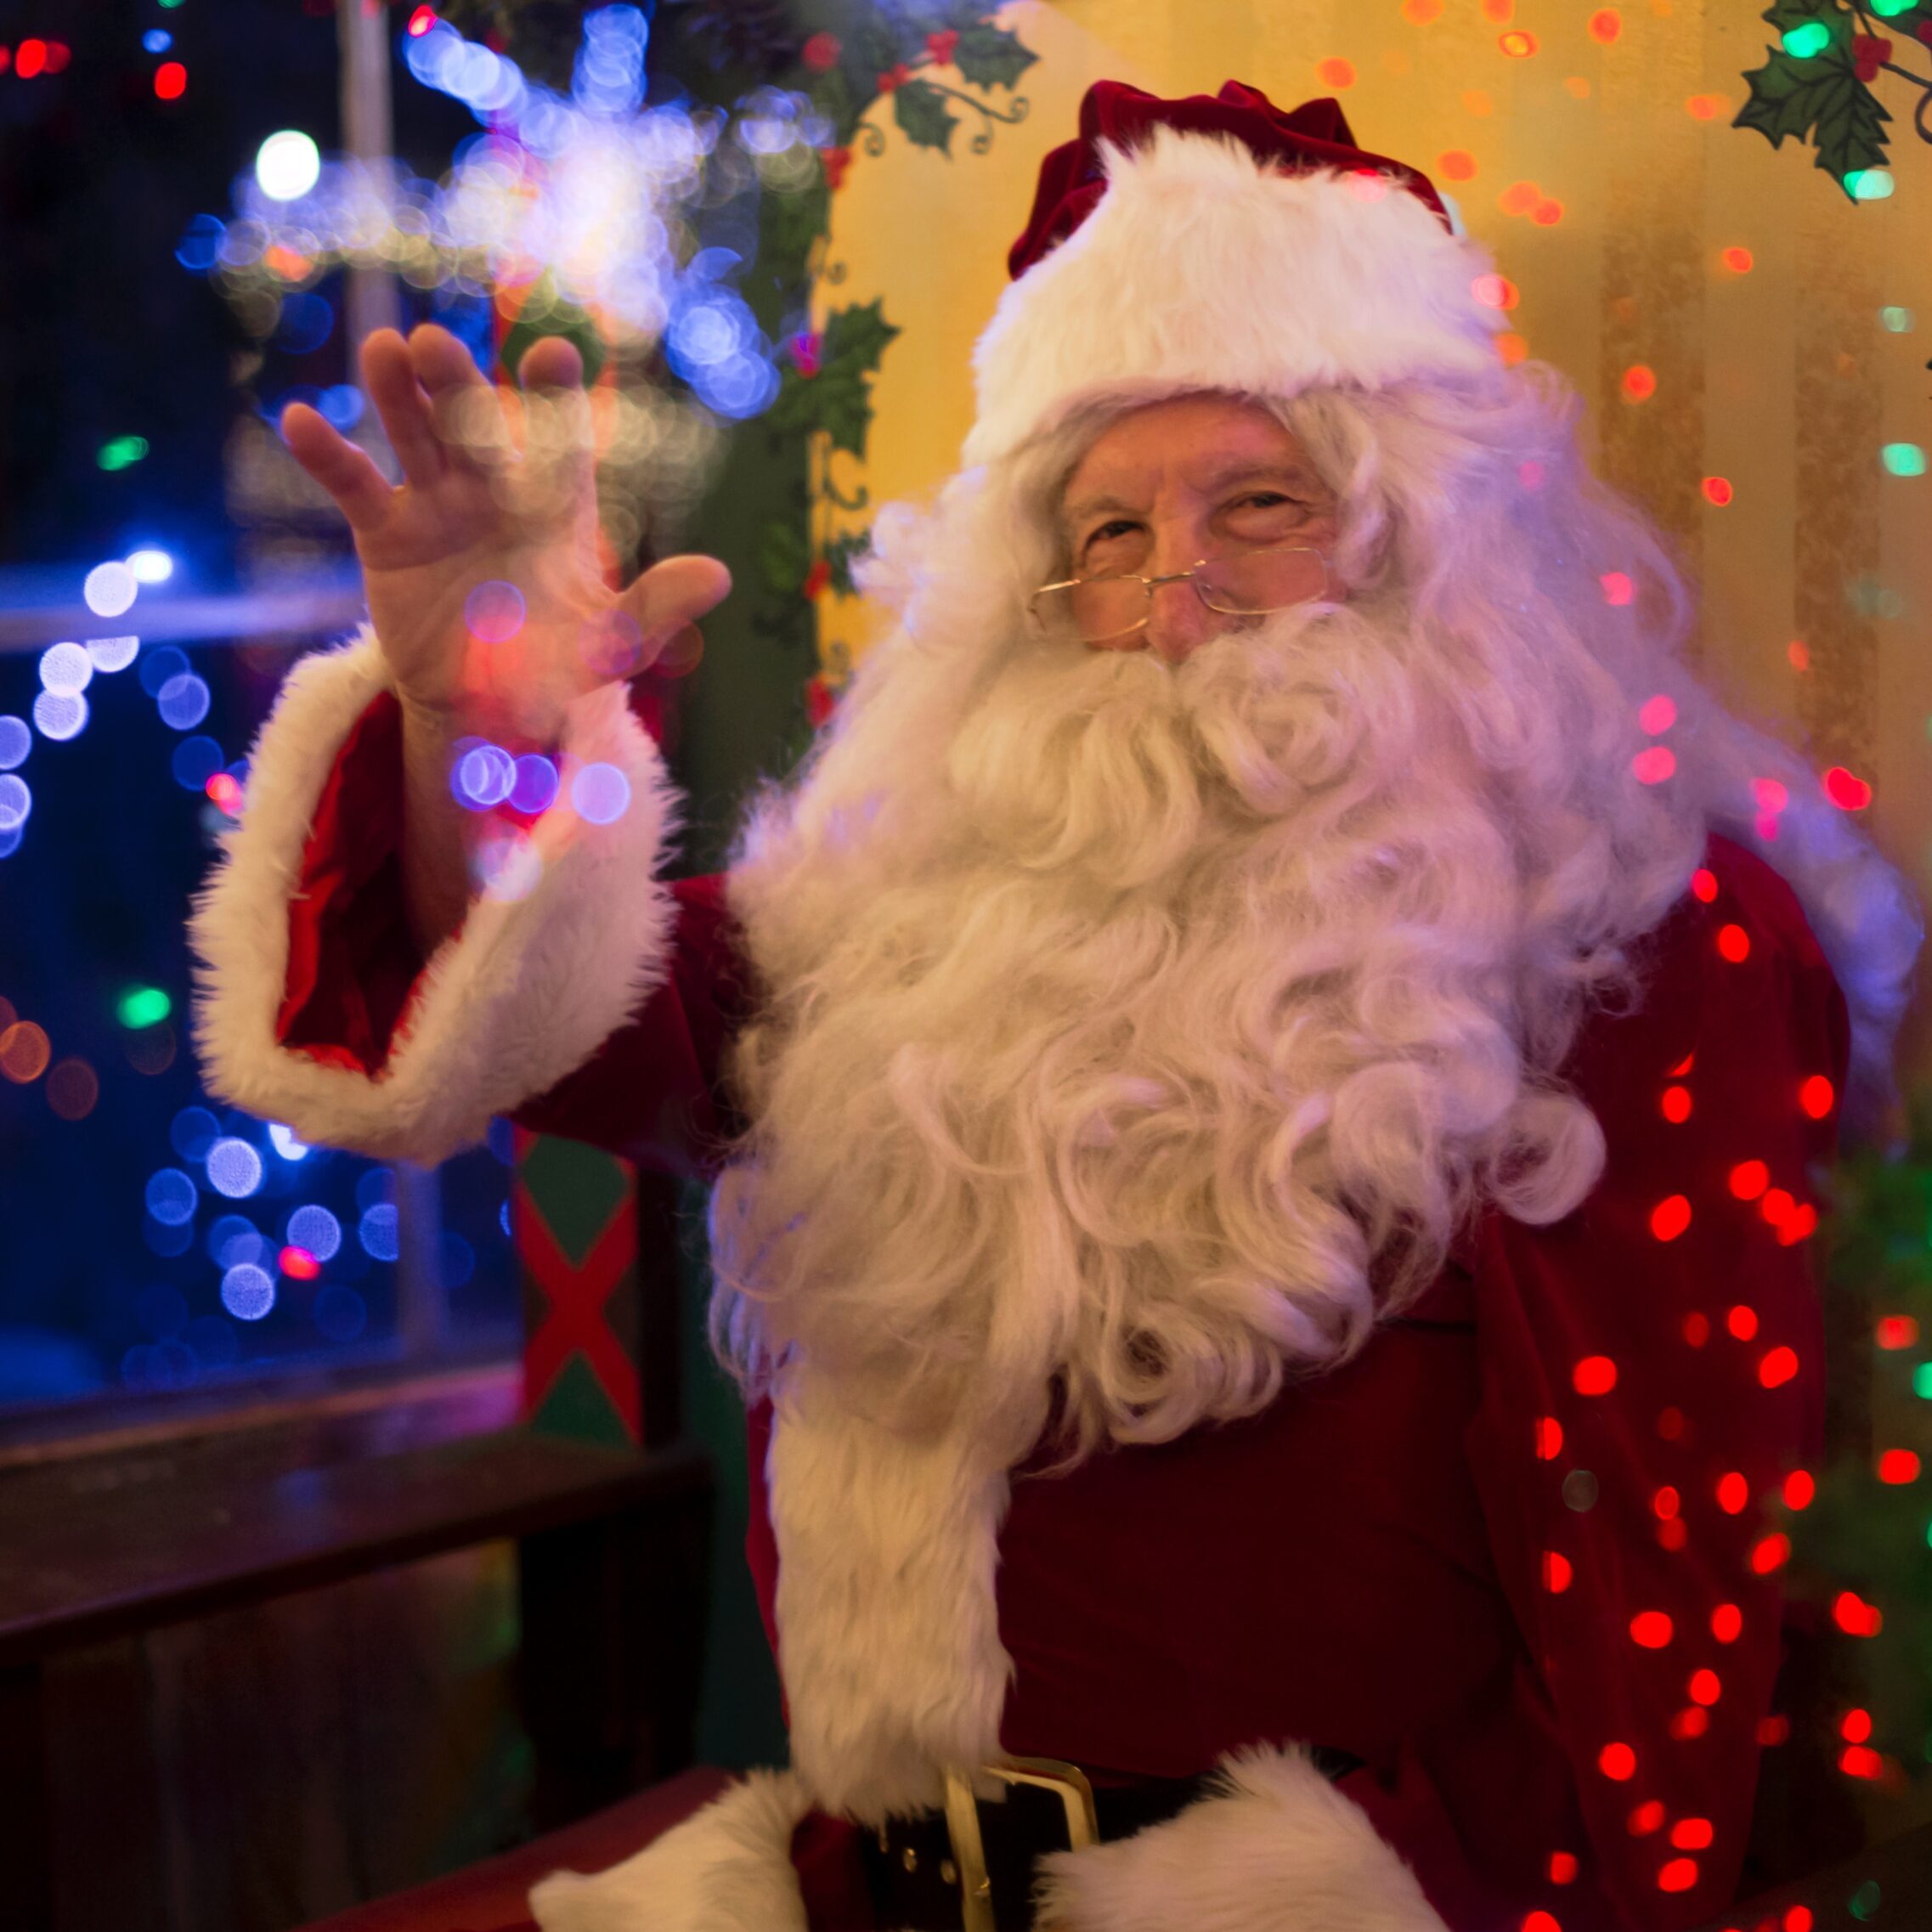 6 Things About Dear Santa and Holiday Traditions